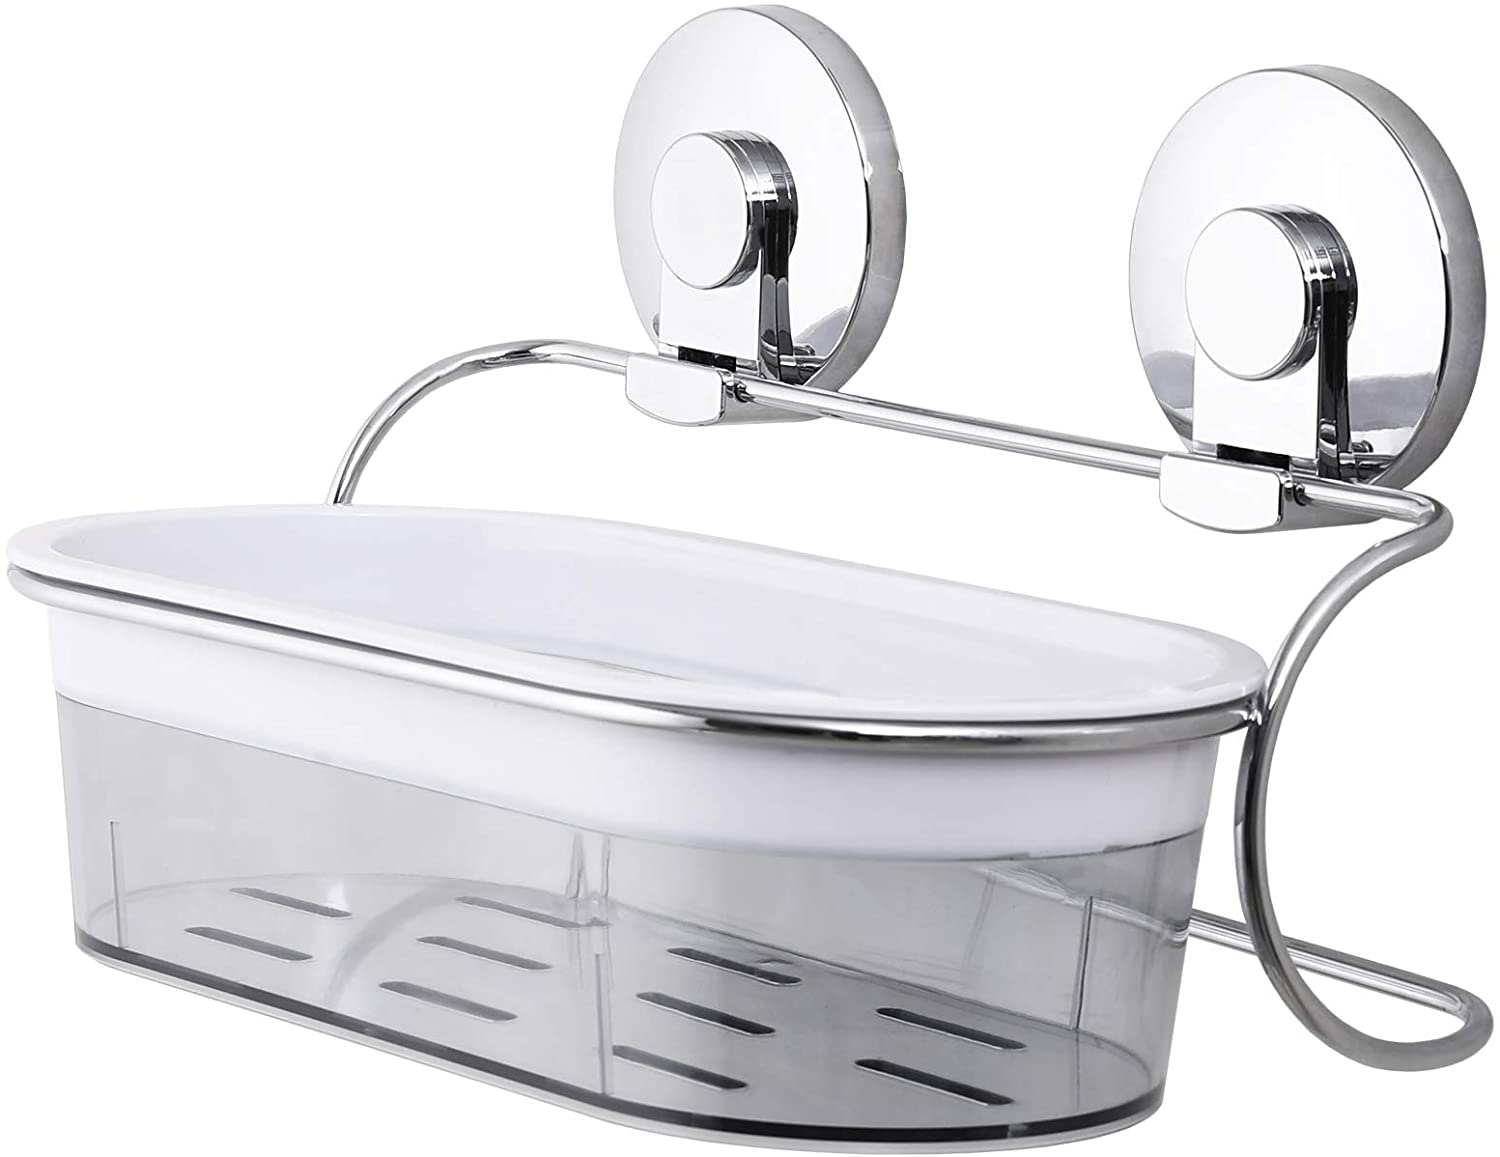 https://www.wideopencountry.com/wp-content/uploads/sites/4/2021/04/TAILI-Bathroom-Shower-Caddy-Powerful-Suction-Cup-Shower-Shelf-Heavy-Duty-Organizer-Shower-Caddies-for-Shampoo-Conditioner-Shower-Gel-Storage-Chrome-Anti-Rust-Max-Hold-Up-to-22-LBS.jpg?resize=1500%2C1157